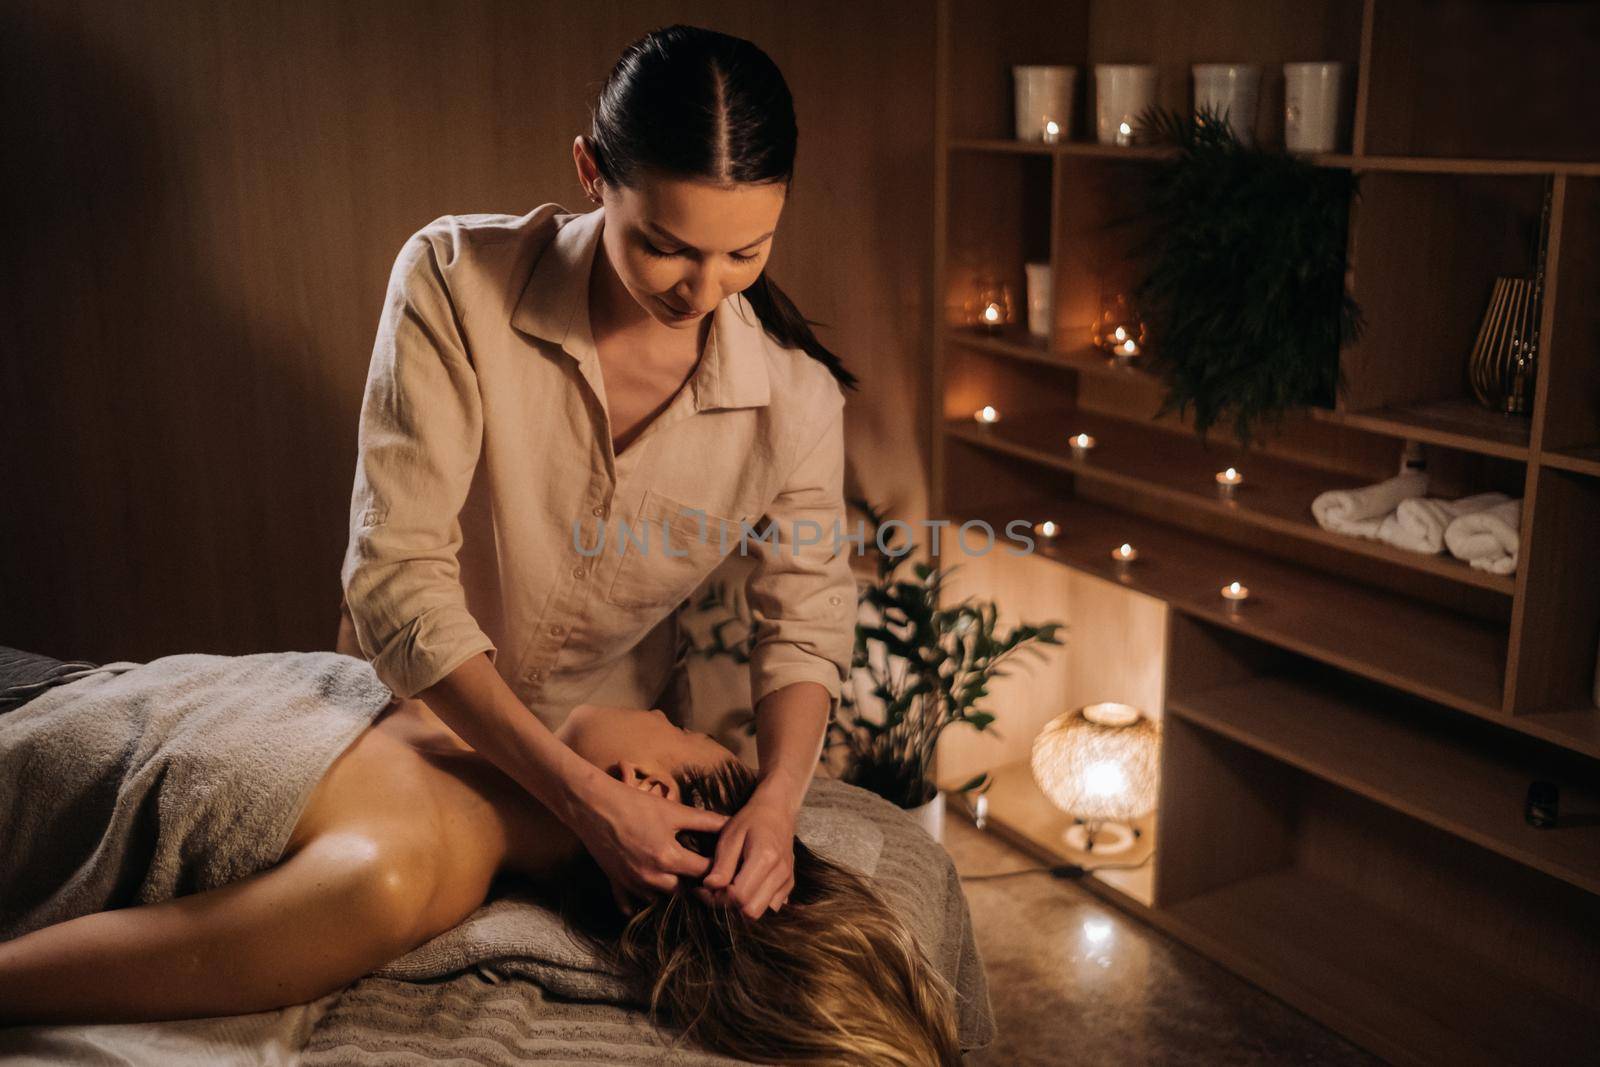 A masseuse gives a head massage to a woman at the spa. A professional masseur massages the head of a girl lying in a spa center.